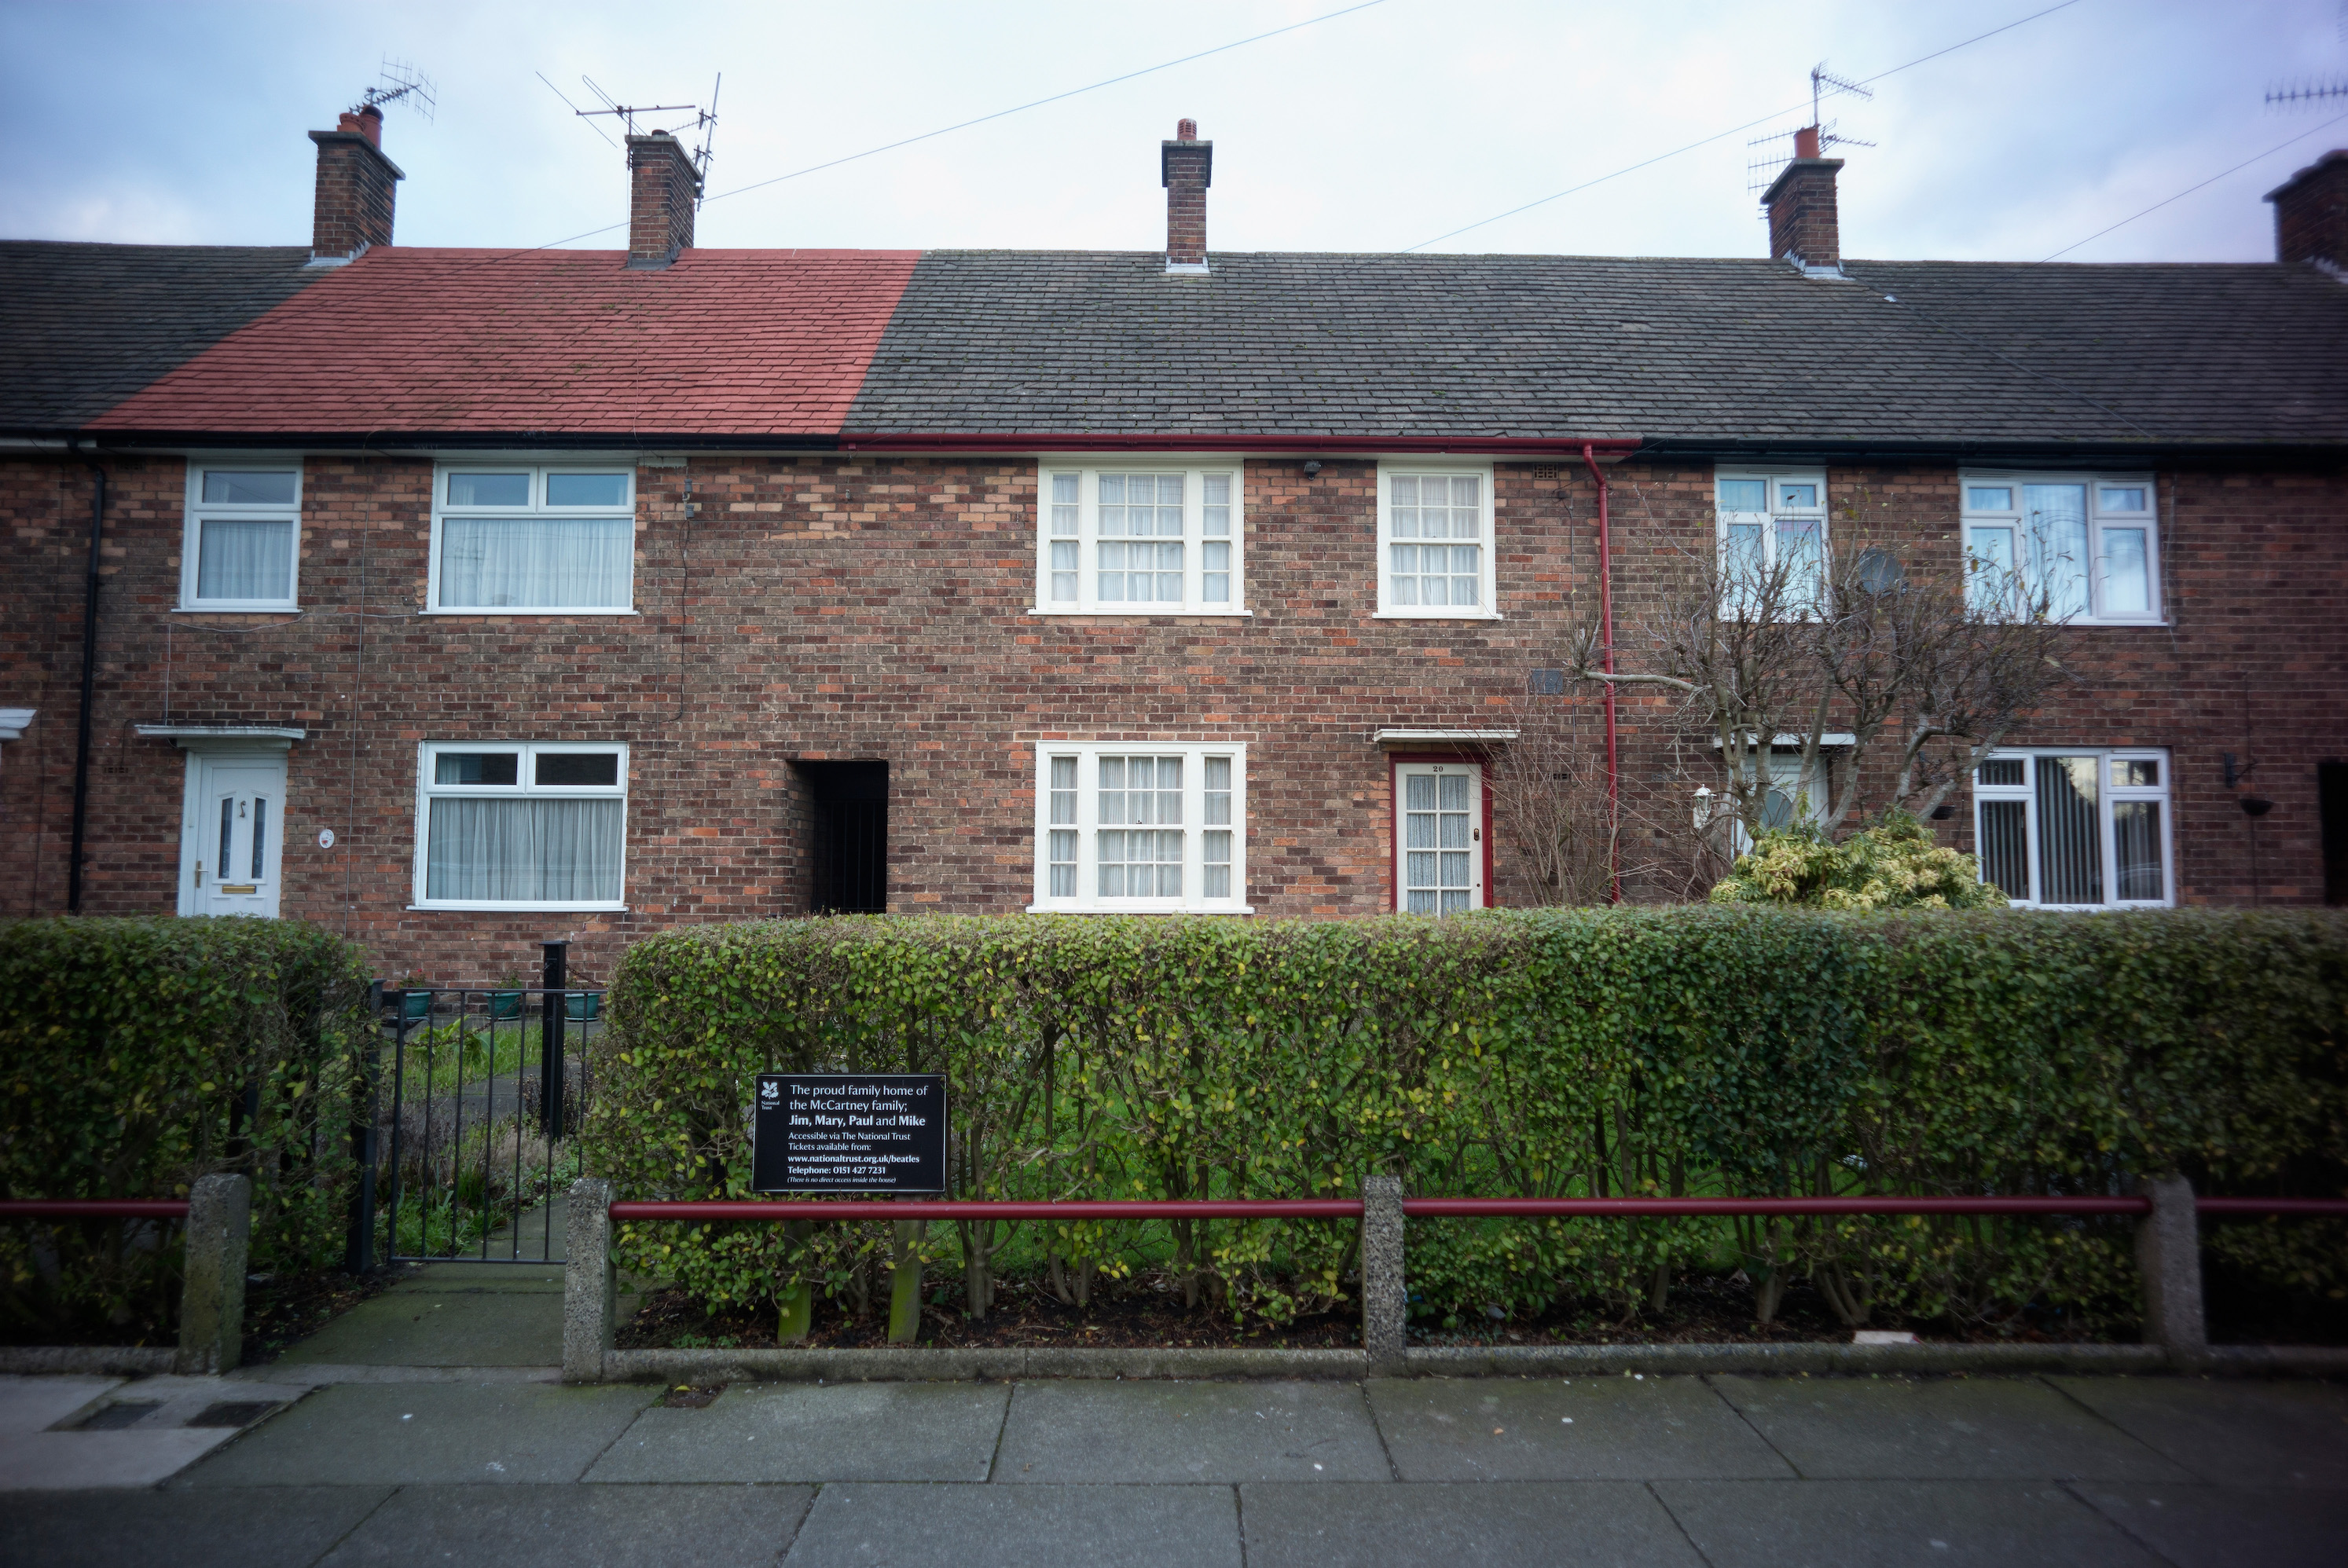 A picture of the childhood home of Paul McCartney in Liverpool